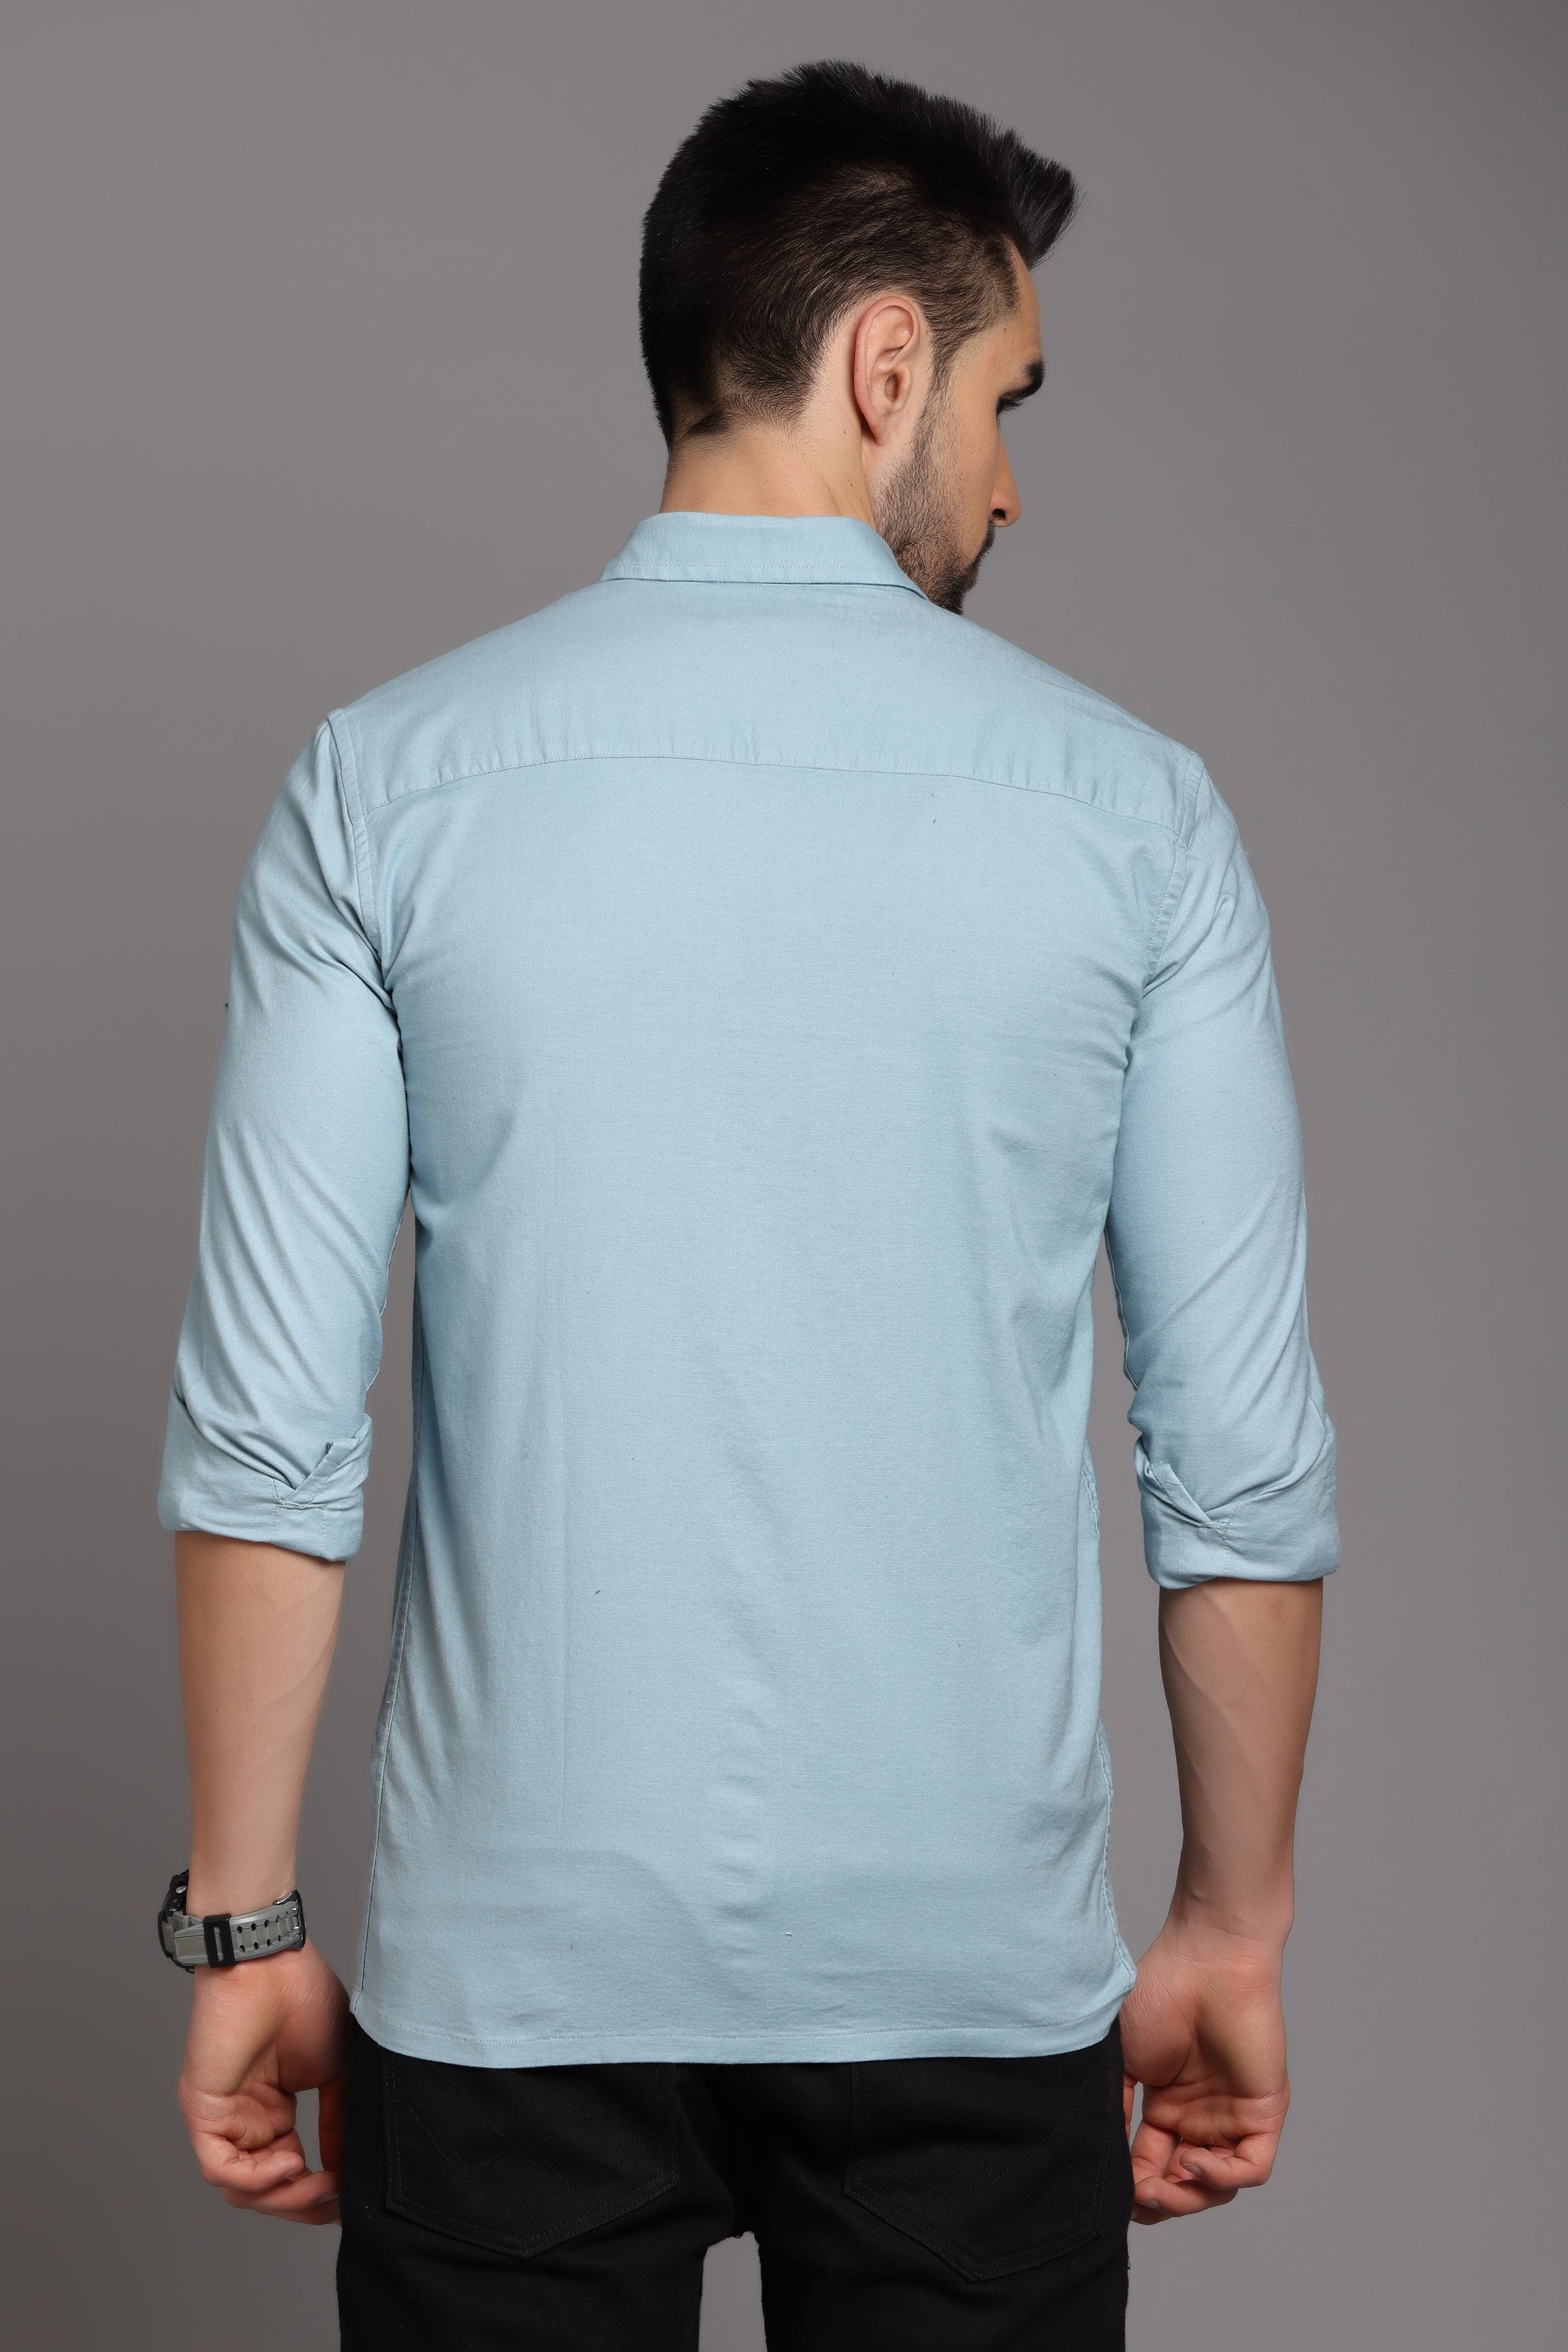 Beau Blue Full Sleeve Shirt with Double Pocket Shirts Project 30 